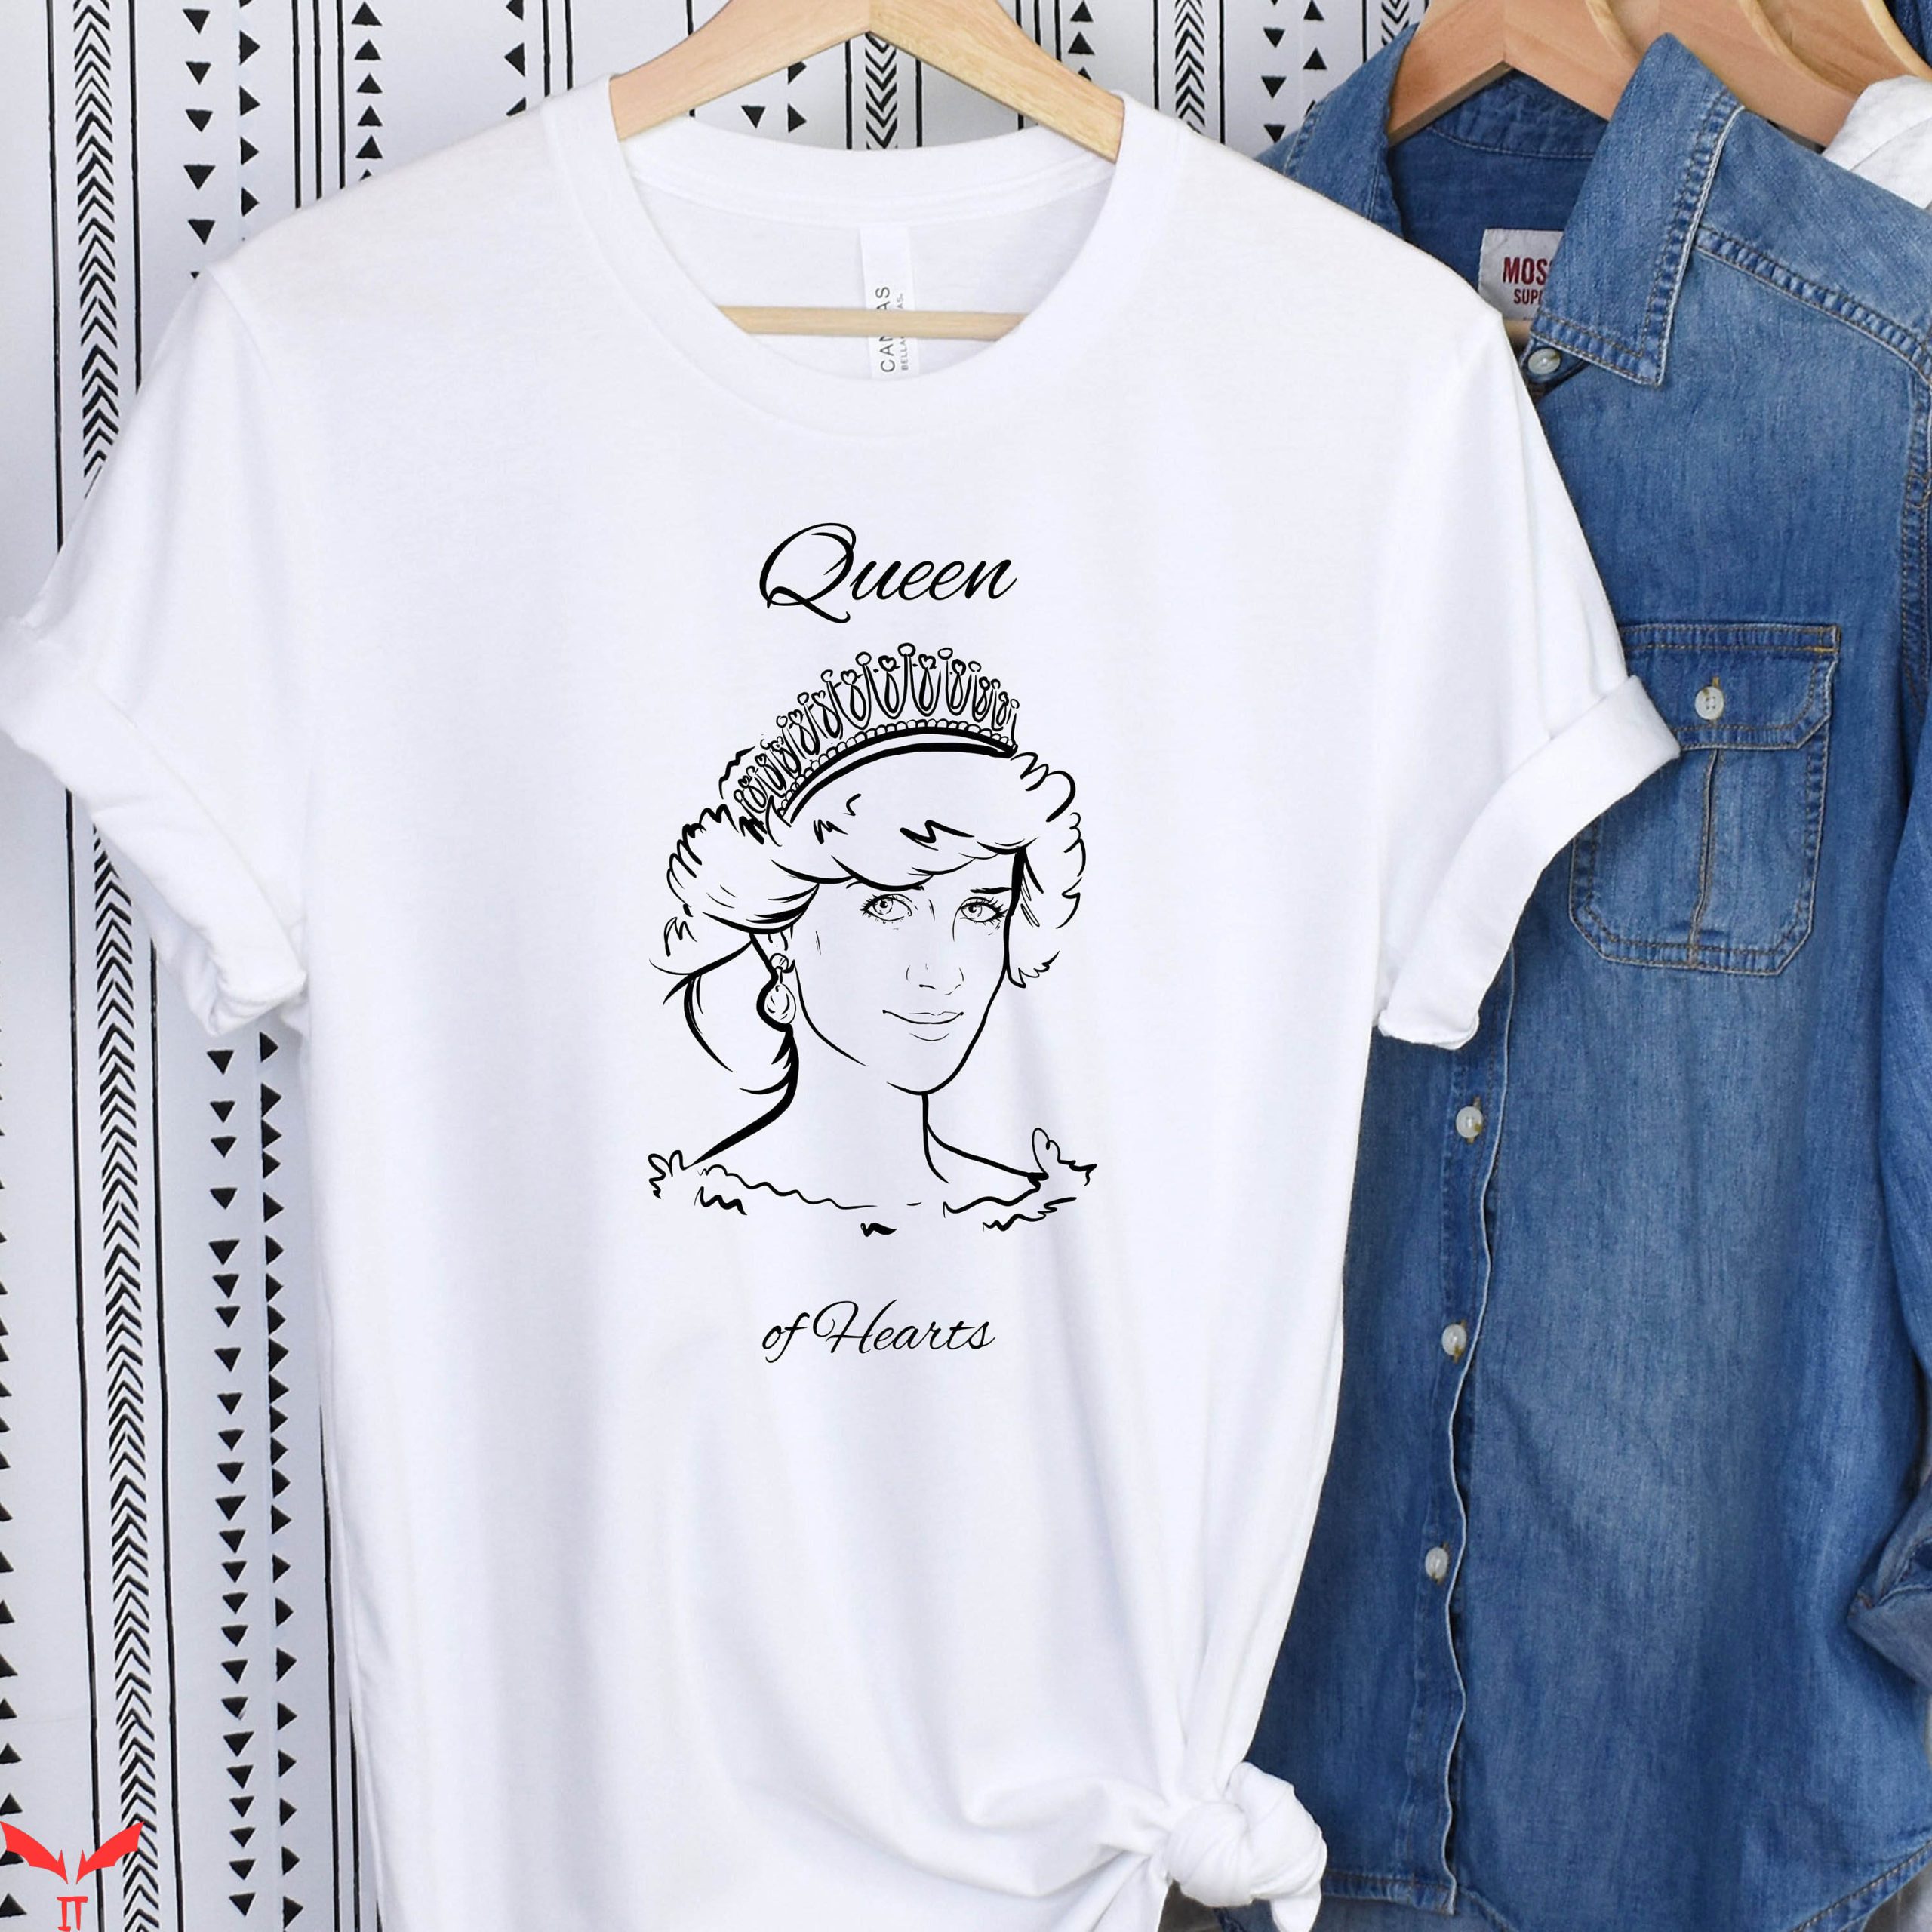 Princess Diana T-Shirt The People's Princess Queen Of Hearts